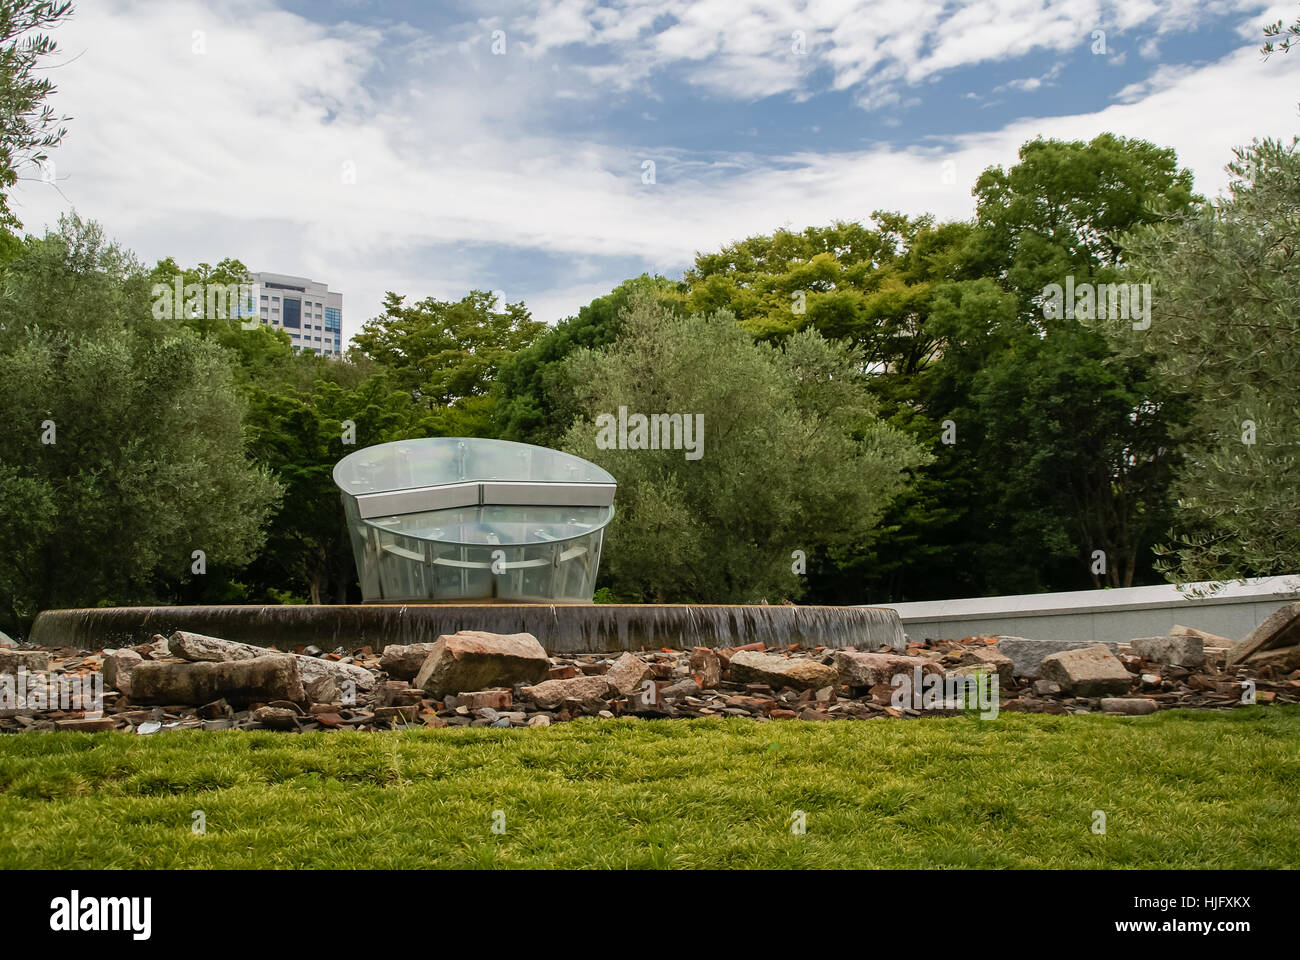 Monument to 8:15, the time the atomic bomb dropped on Hiroshima. Stock Photo